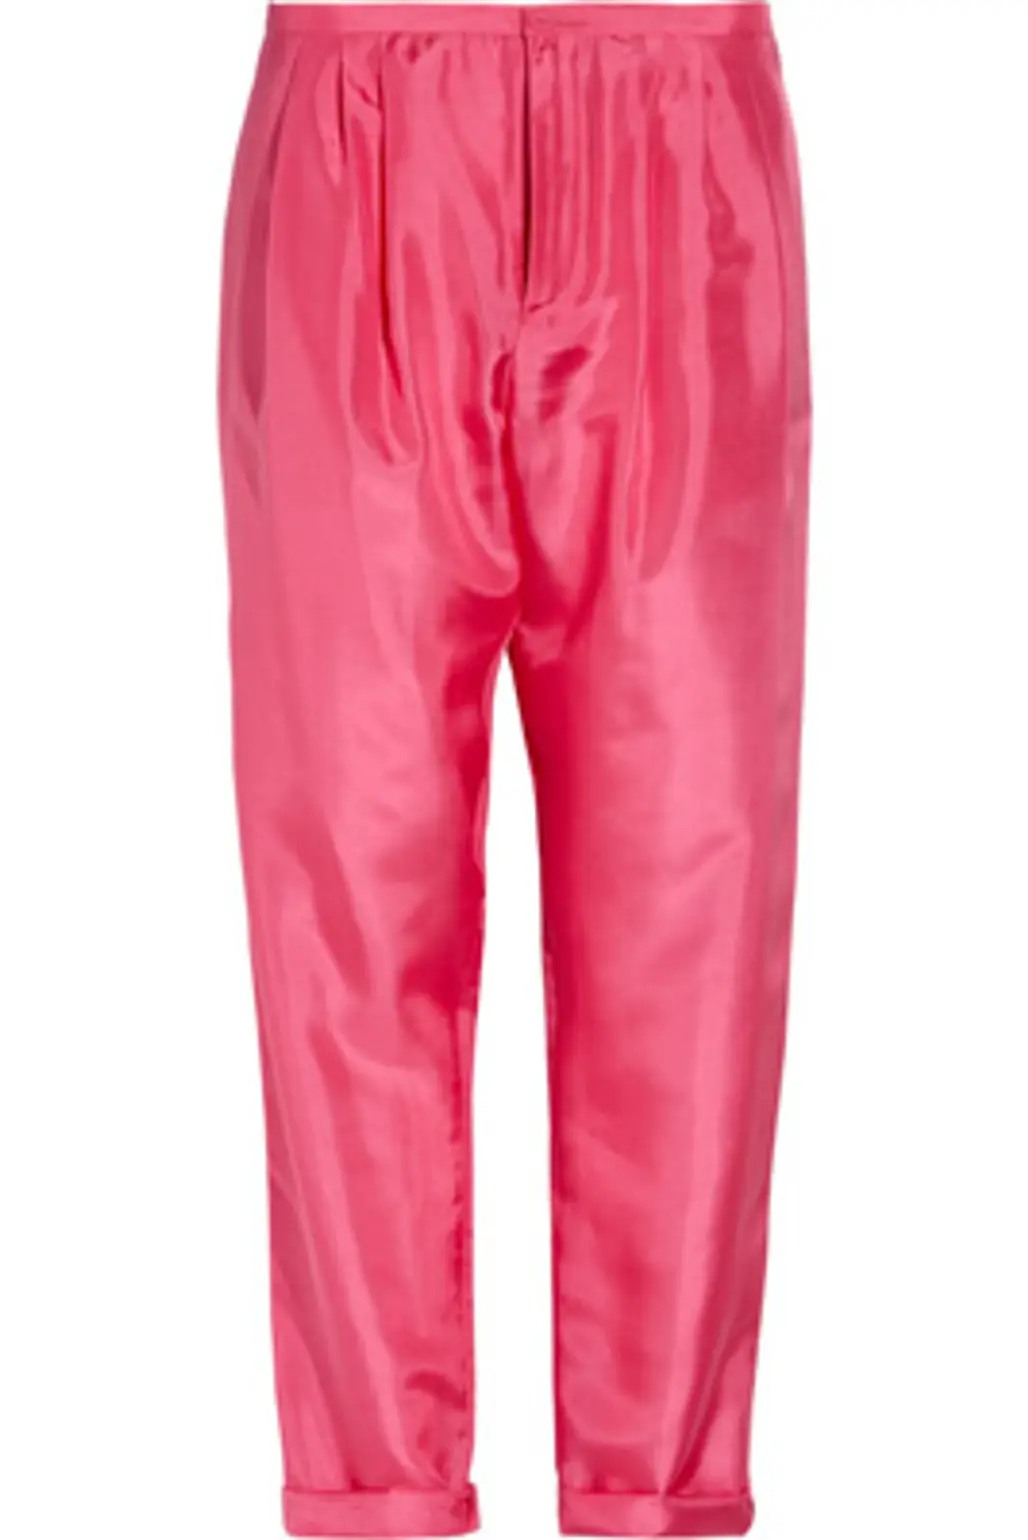 Slouchy Pink Pants